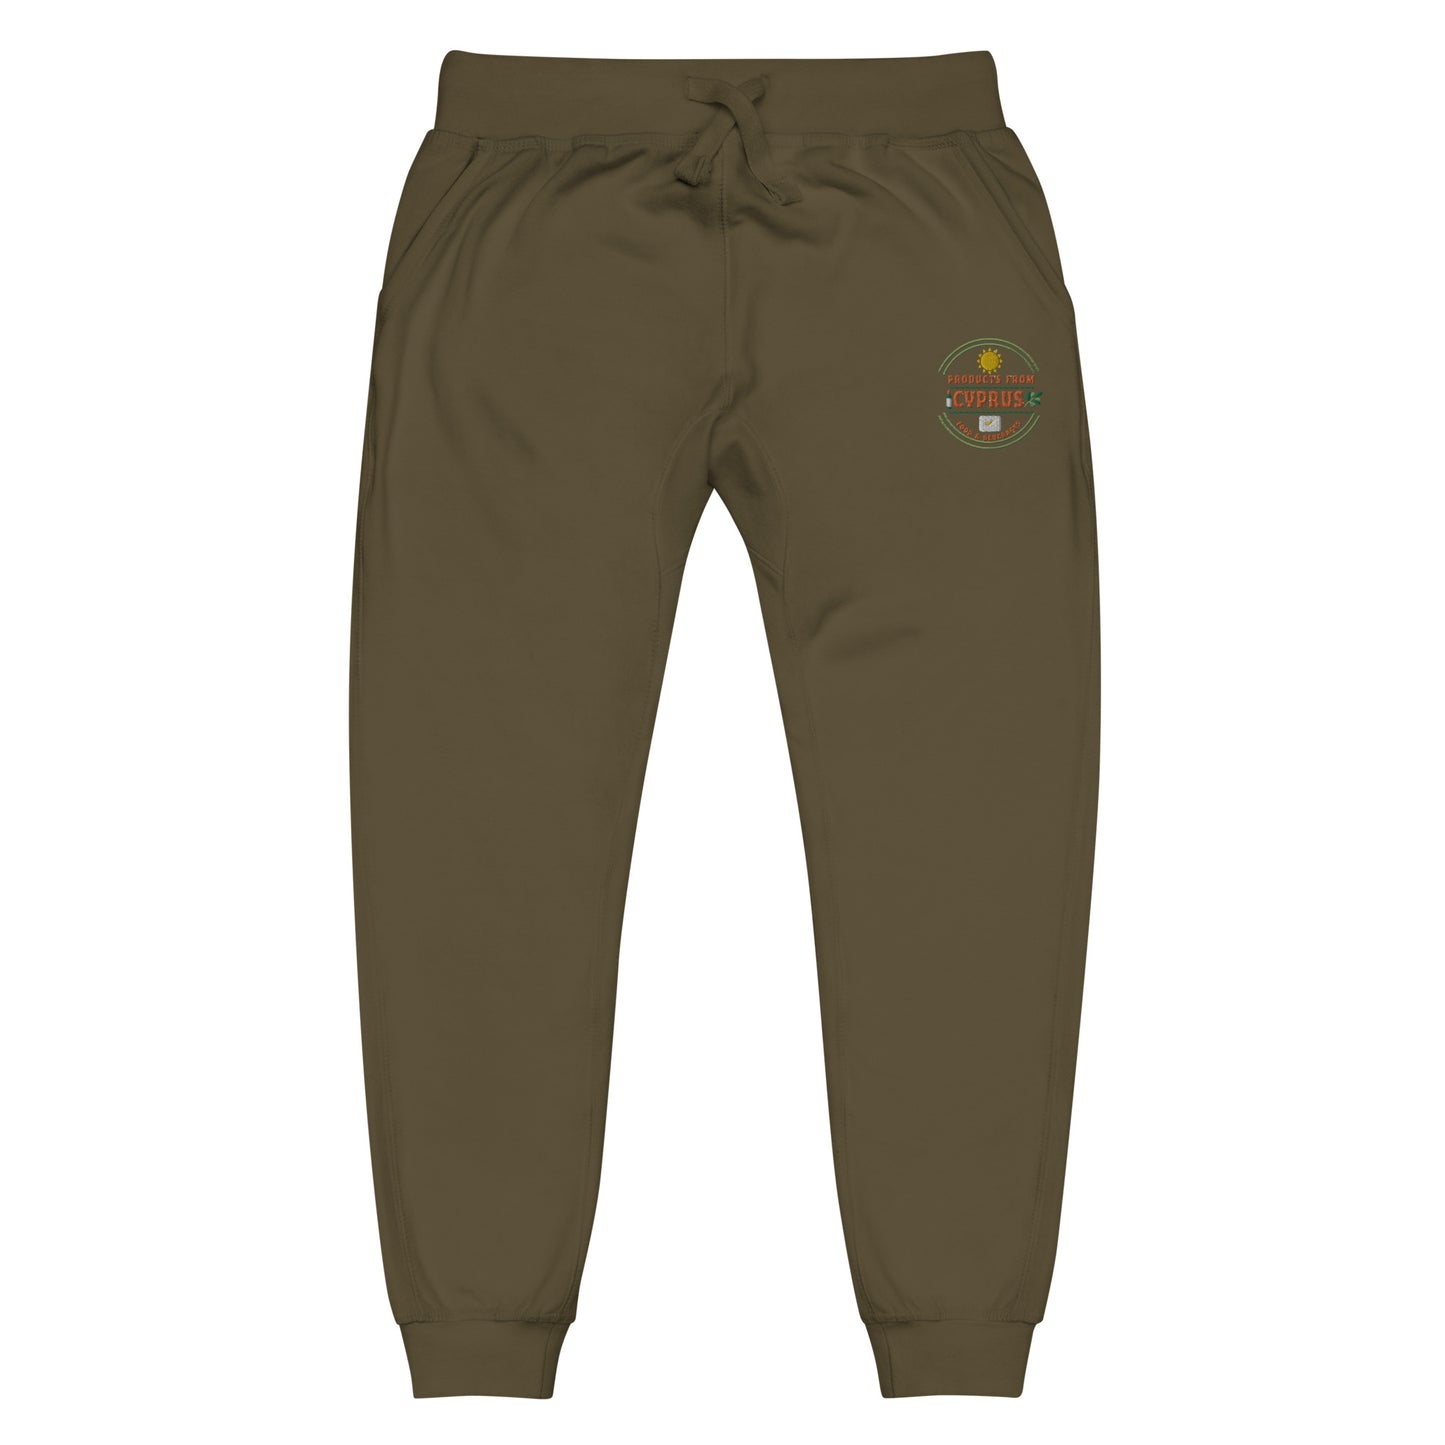 Products from Cyprus Unisex fleece sweatpants